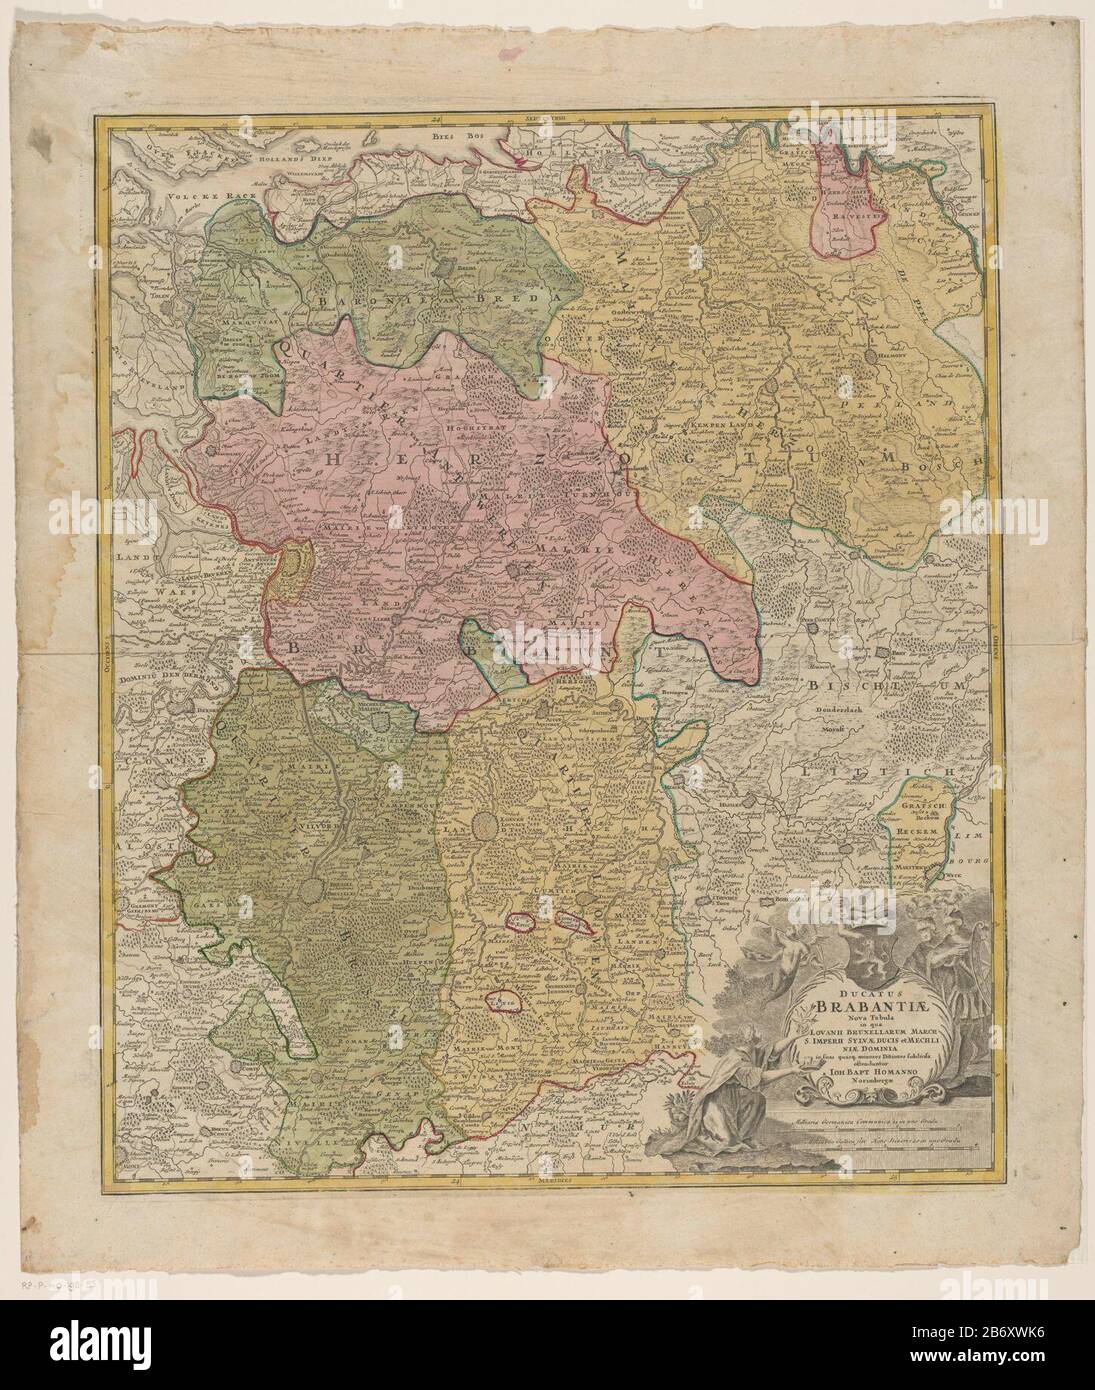 Kaart van het hertogdom Brabant Ducatus Brabantiae nova tabula in qua Lovanii Bruxellarum (titel op object) Map of the Duchy of Brabant. Right Under the title cartouche above the arms of the Duchy of Brabant and scale under two poles: Milli Aria Germanica Communia 15 in uno Graduation / Milli Aria Gallica sive Horae Itineris 20 in uno Graduation. The card has a degree distribution along the randen. Manufacturer : printmaker: anonymous editor: Johann Baptista Homann (listed property) Place manufacture: Nuremberg Date: 1674 - 1724 Physical features: engra, hand-colored material: paper Technique: Stock Photo